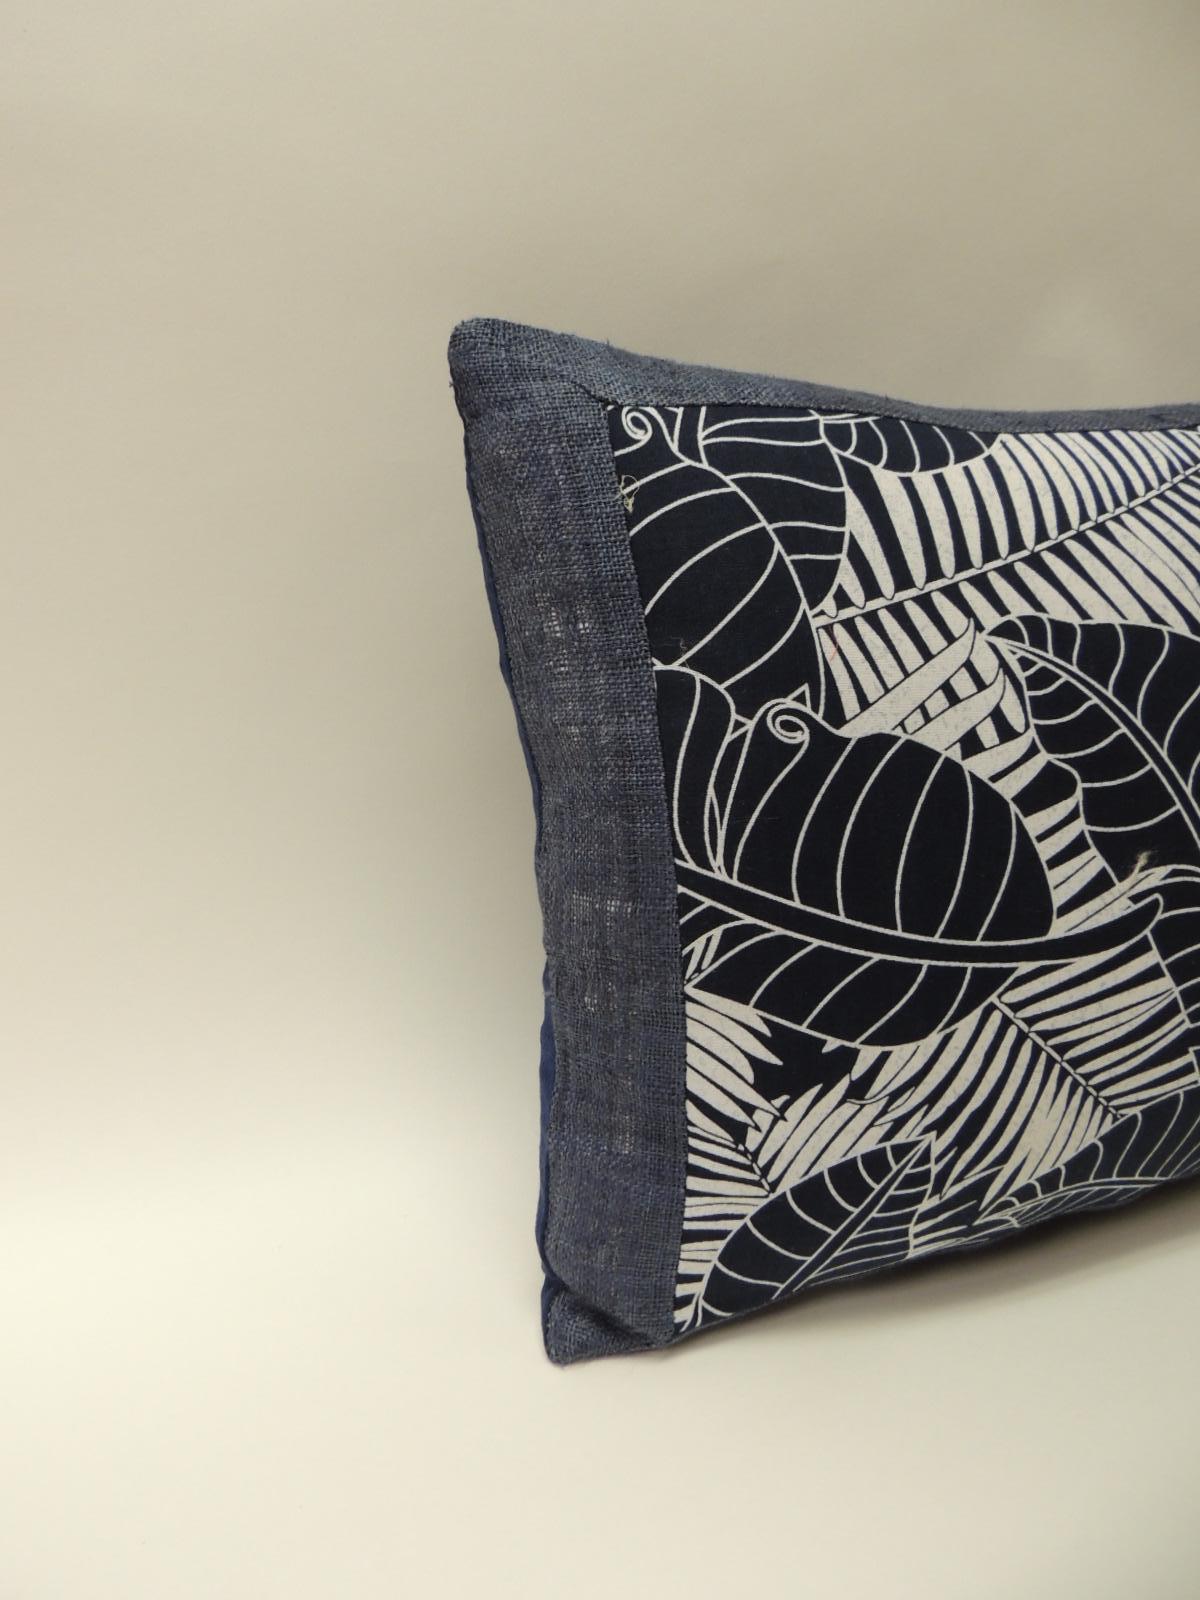 Japanese indigo and white bolster pillow, depicting palm fronds and banana leaves, framed 
with home-spun blue linen and royal blue linen backing. Pillow hand-made with an 
artisanal textile and designed in the USA. Closure by stitch (no zipper)